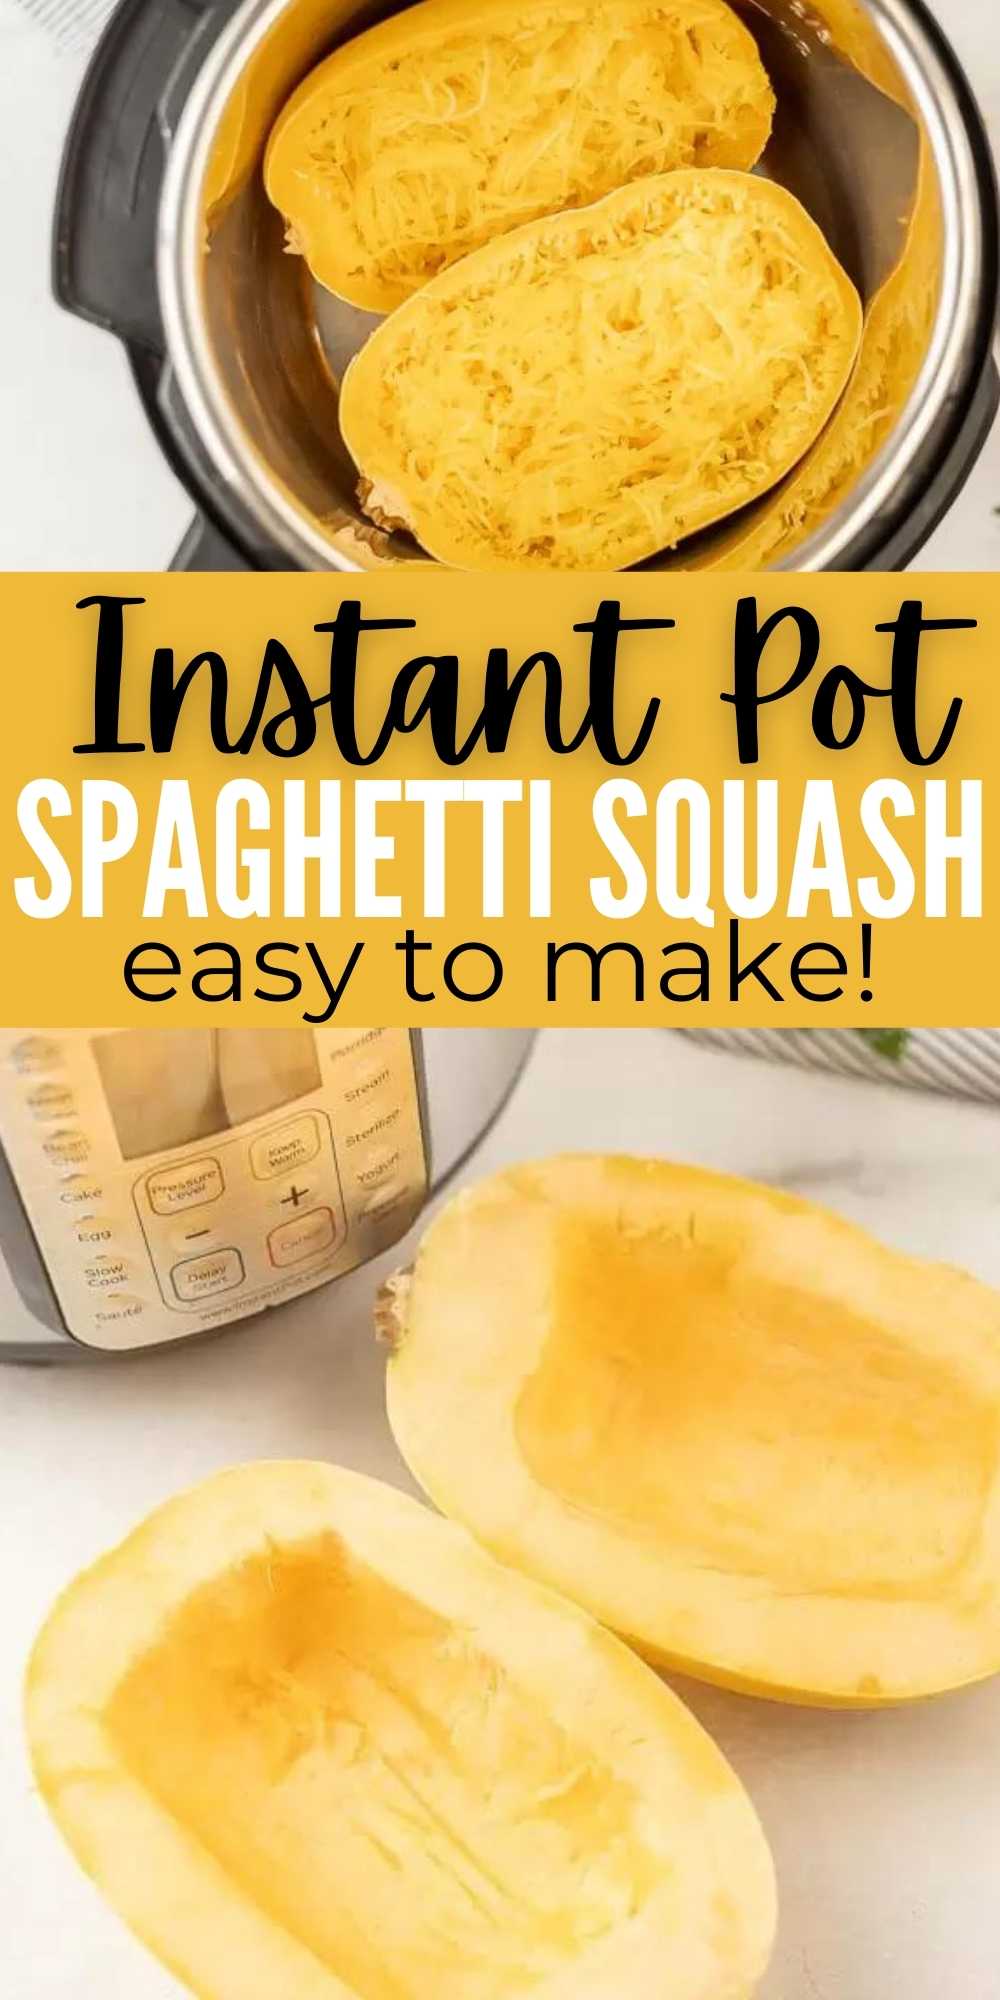 You are going to love this quick and easy Instant Pot Spaghetti Squash Recipe. How to make Spaghetti squash whole in minutes in the electric pressure cooker. Learn how to cook spaghetti squash in an Instant Pot.  It’s easy to make, healthy and delicious! #eatingonadime #instantpotrecipes #spaghettisquash #sidedishes #healthyrecipes 
